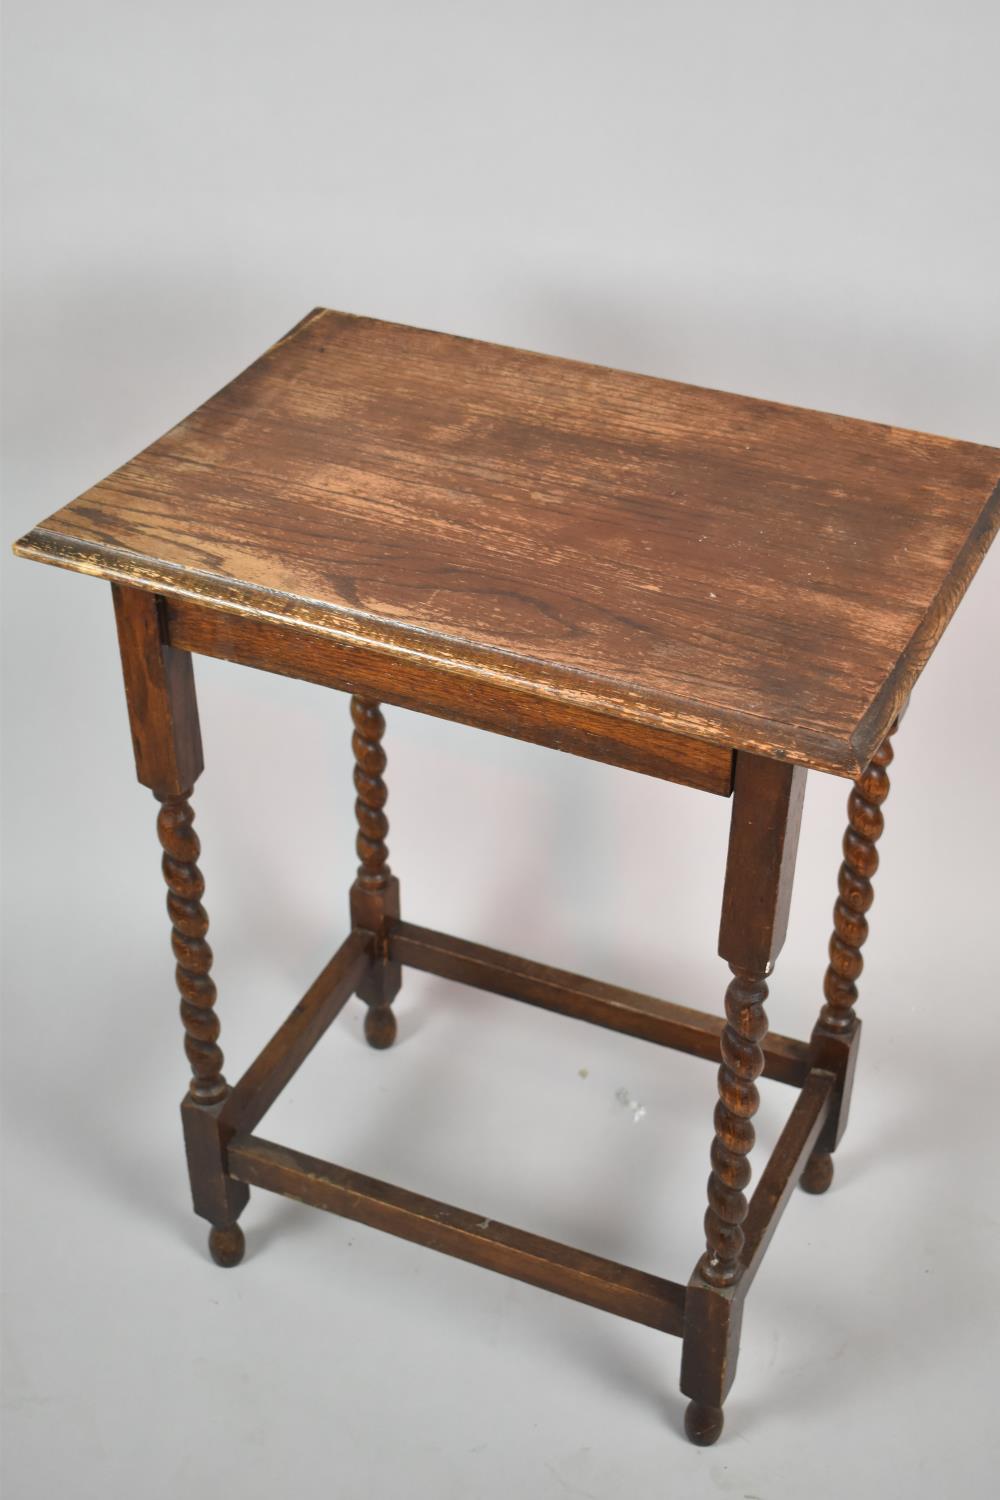 A Mid 20th Century Oak Rectangular Barley Twist Occasional Table, 58cm wide - Image 2 of 2